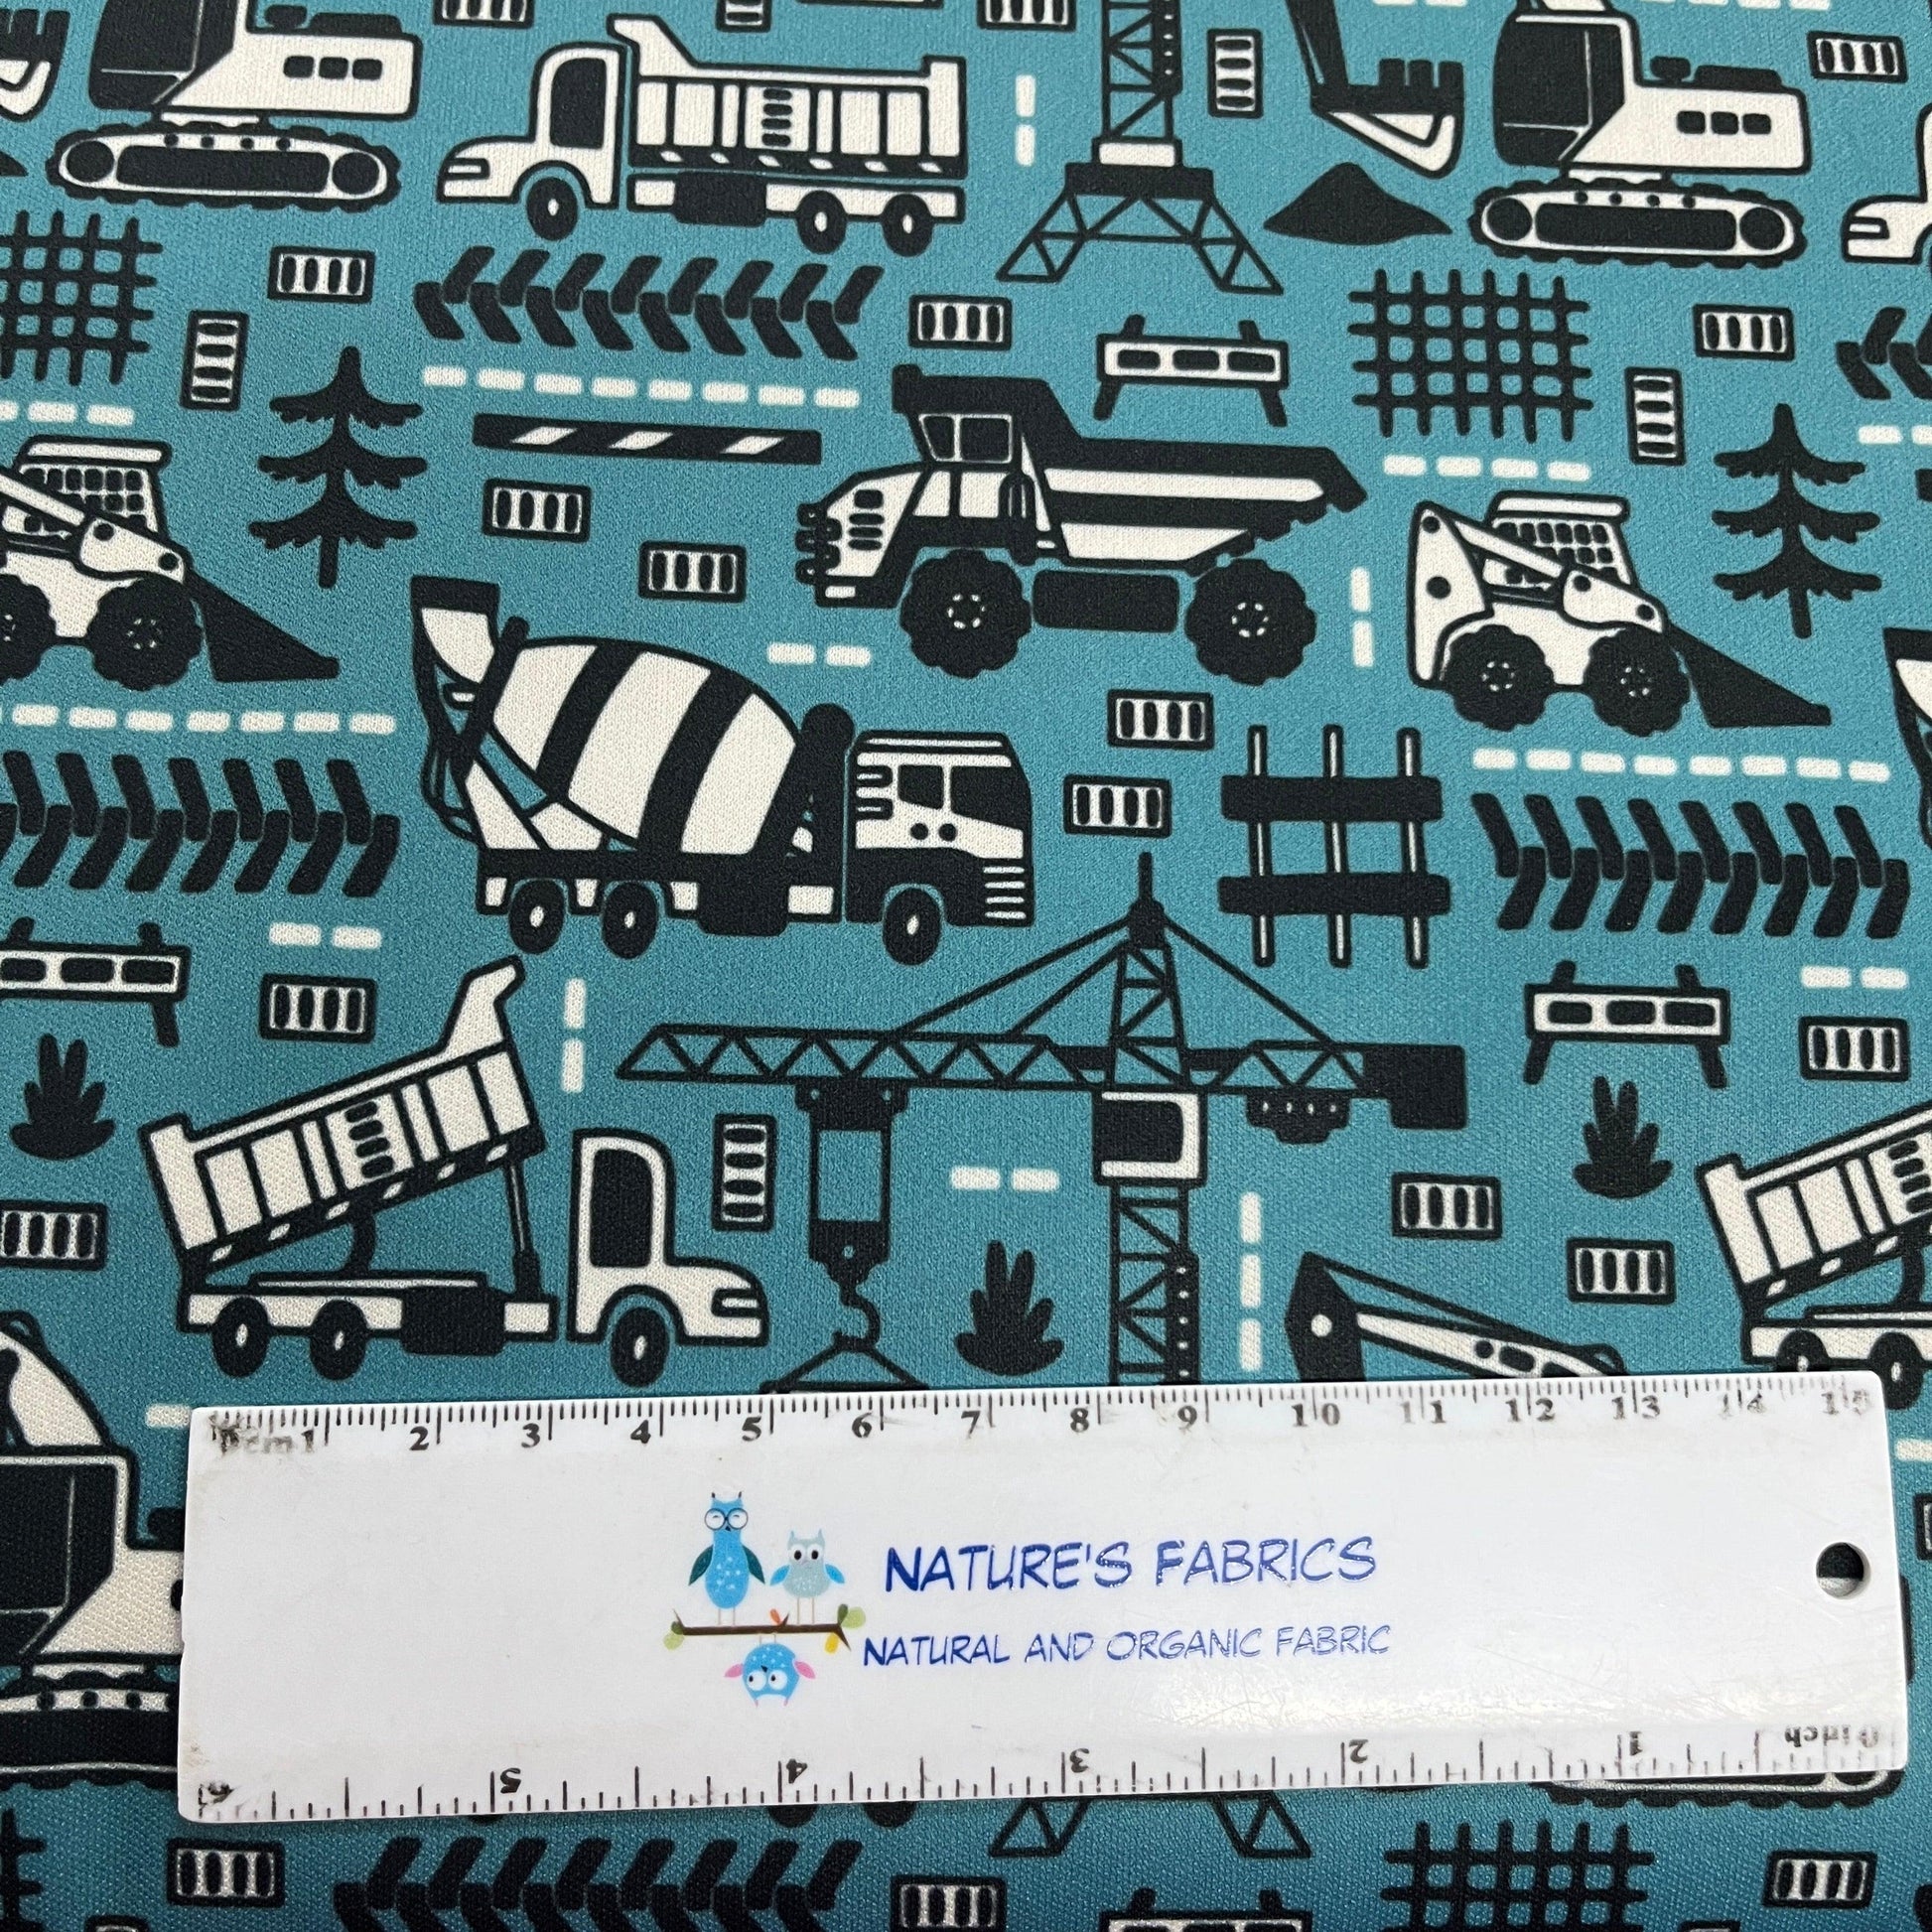 Construction on Teal 1 mil PUL Fabric - Made in the USA - Nature's Fabrics